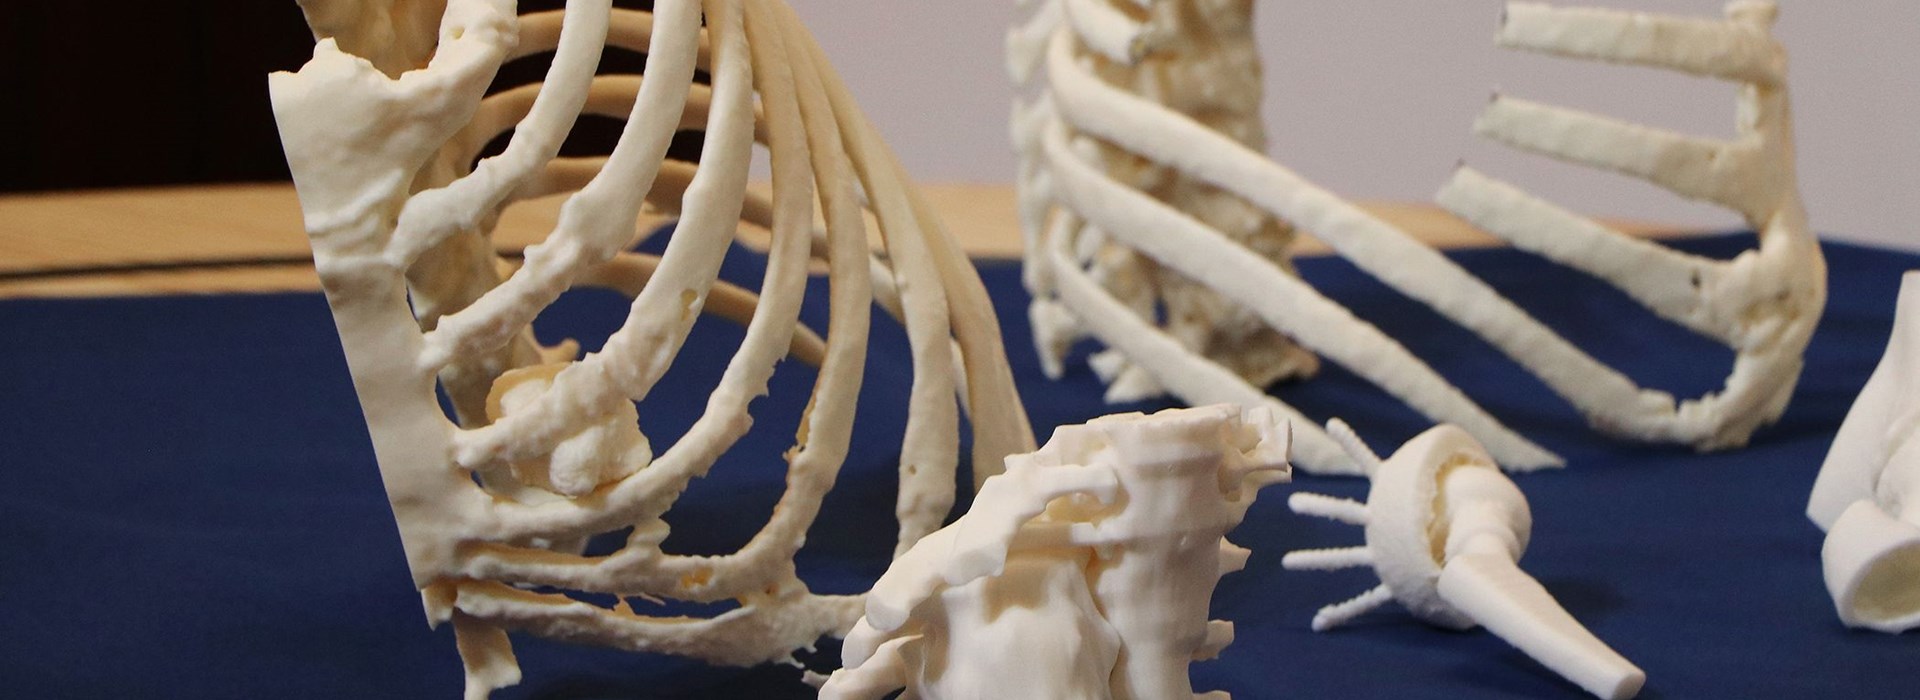 3D printed models of the thoracic wall enable surgeons to plan, perform and perfect the resection on the 3D model ahead of the actual surgery.